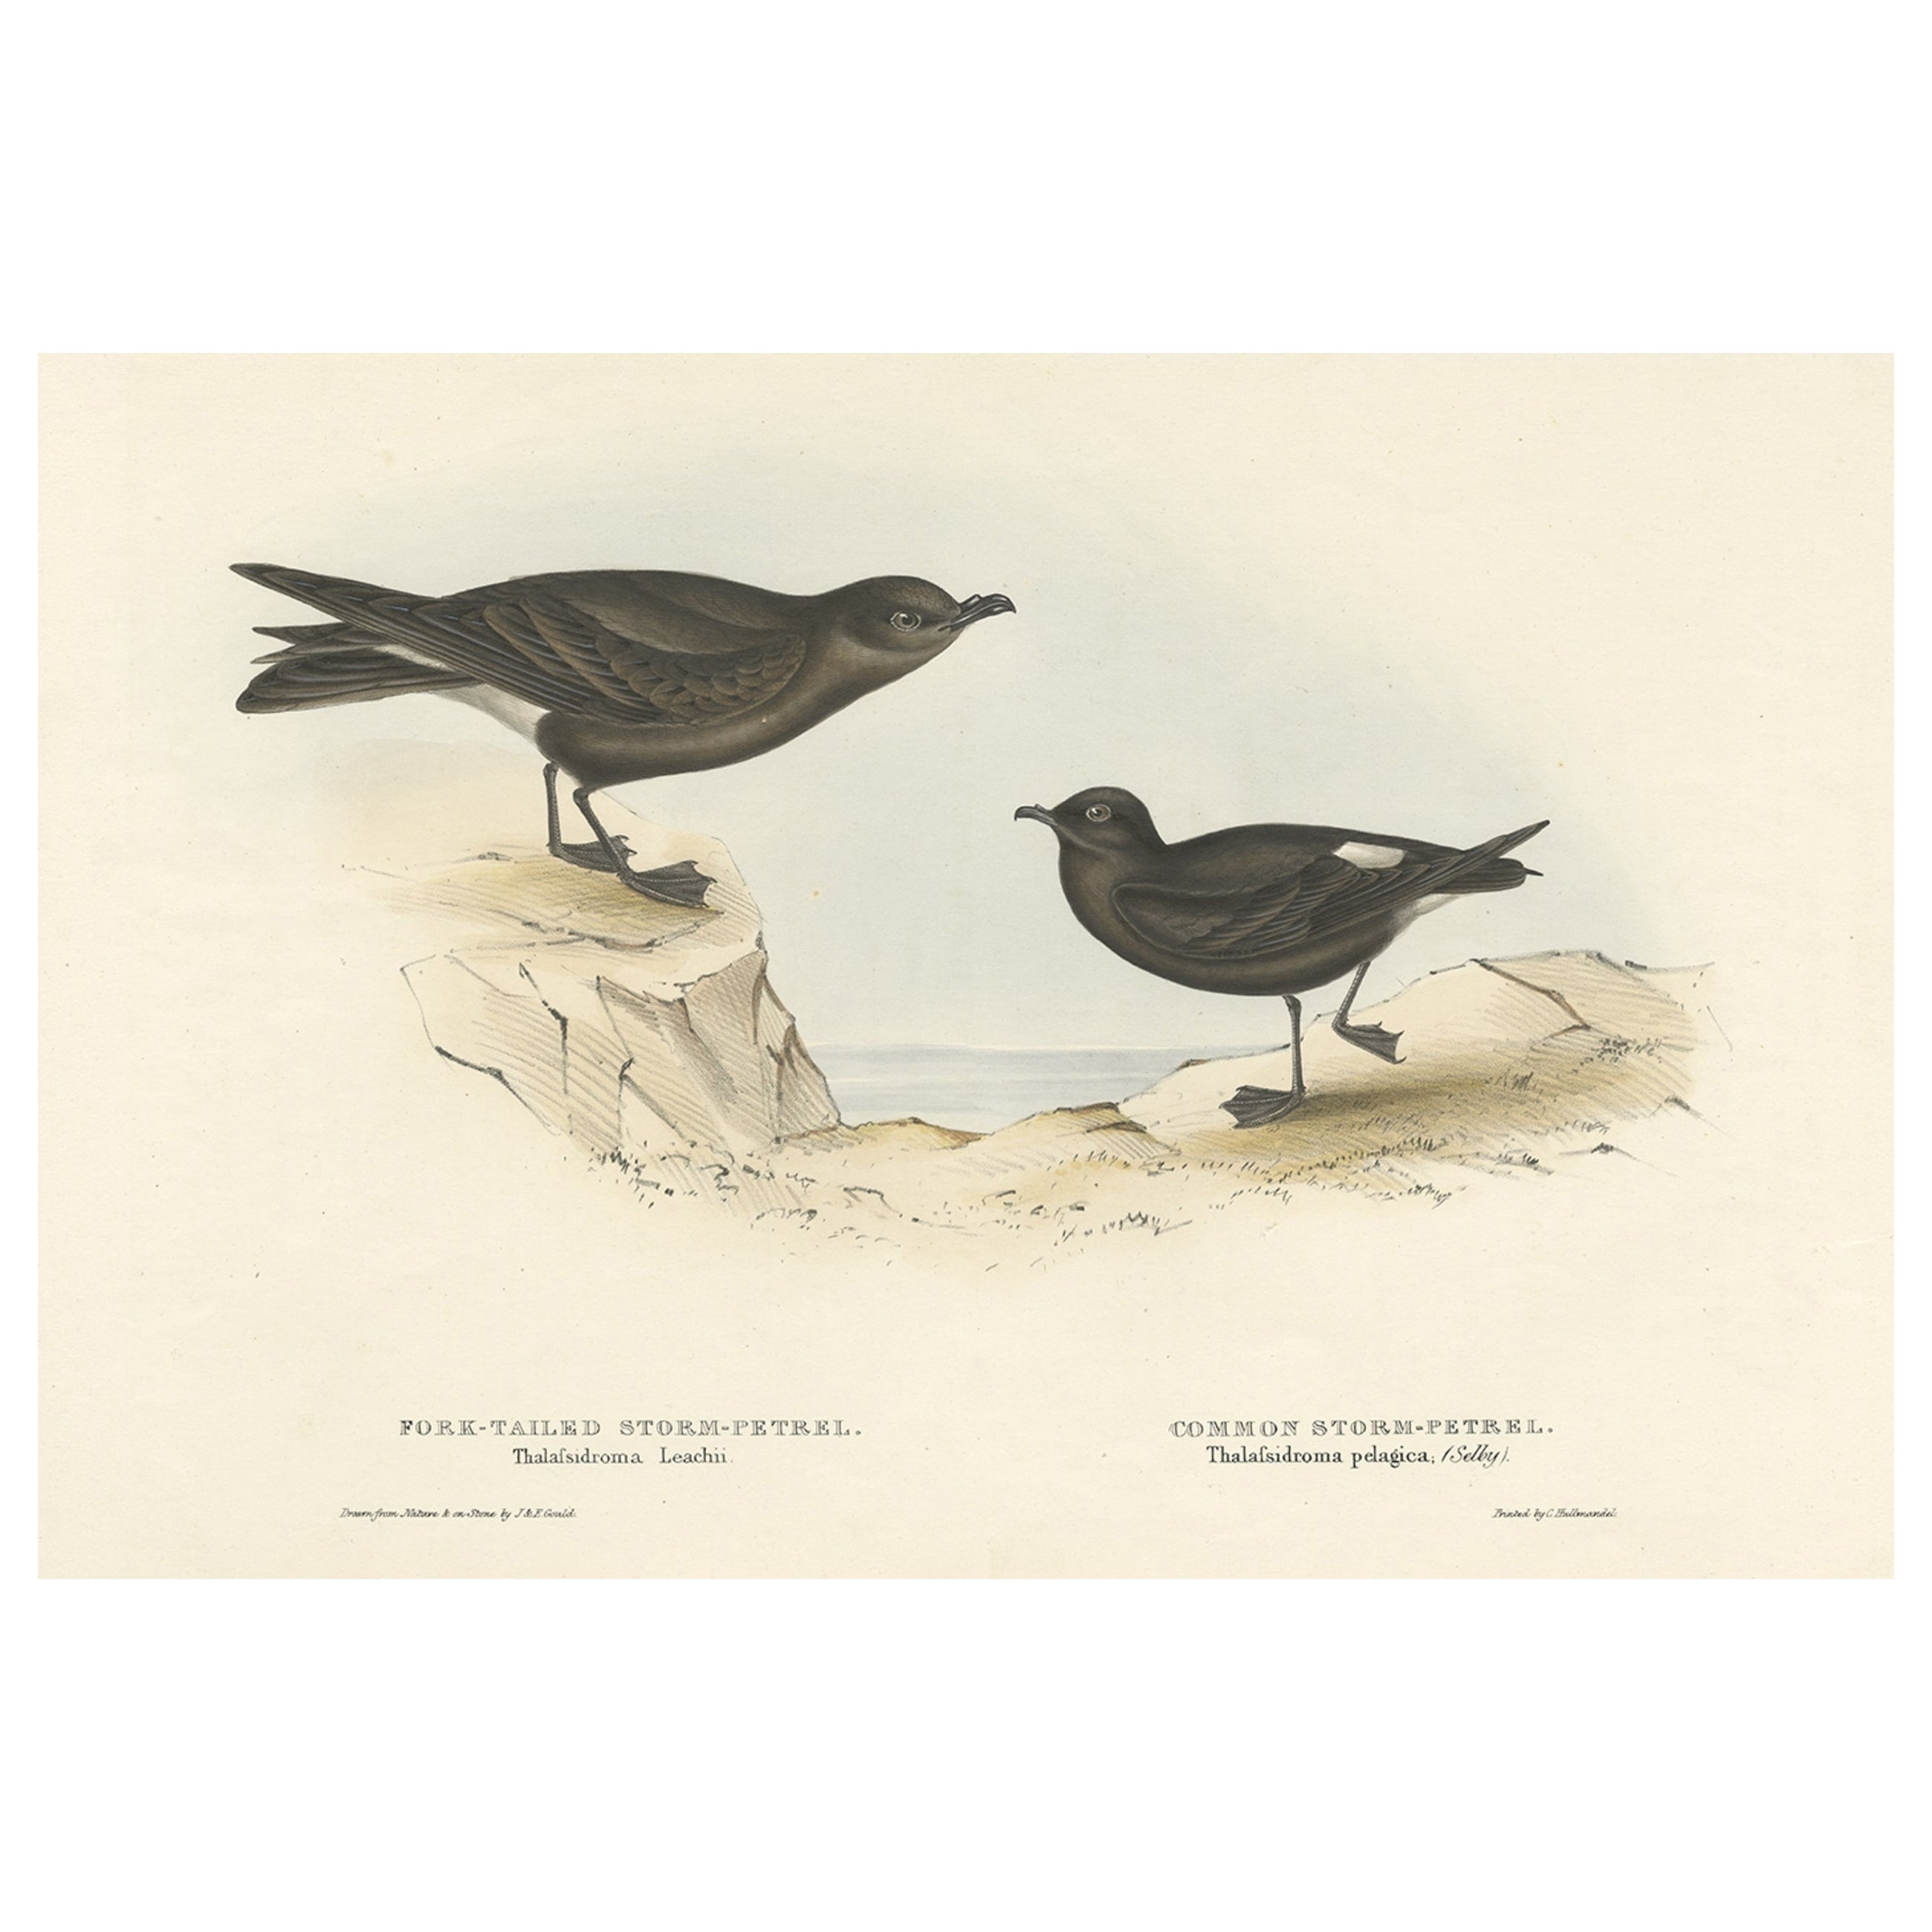 Old Bird Print of the Fork-Tailed Storm-Petrel and Common Storm-Petrel, 1832, Druck eines alten Vogels